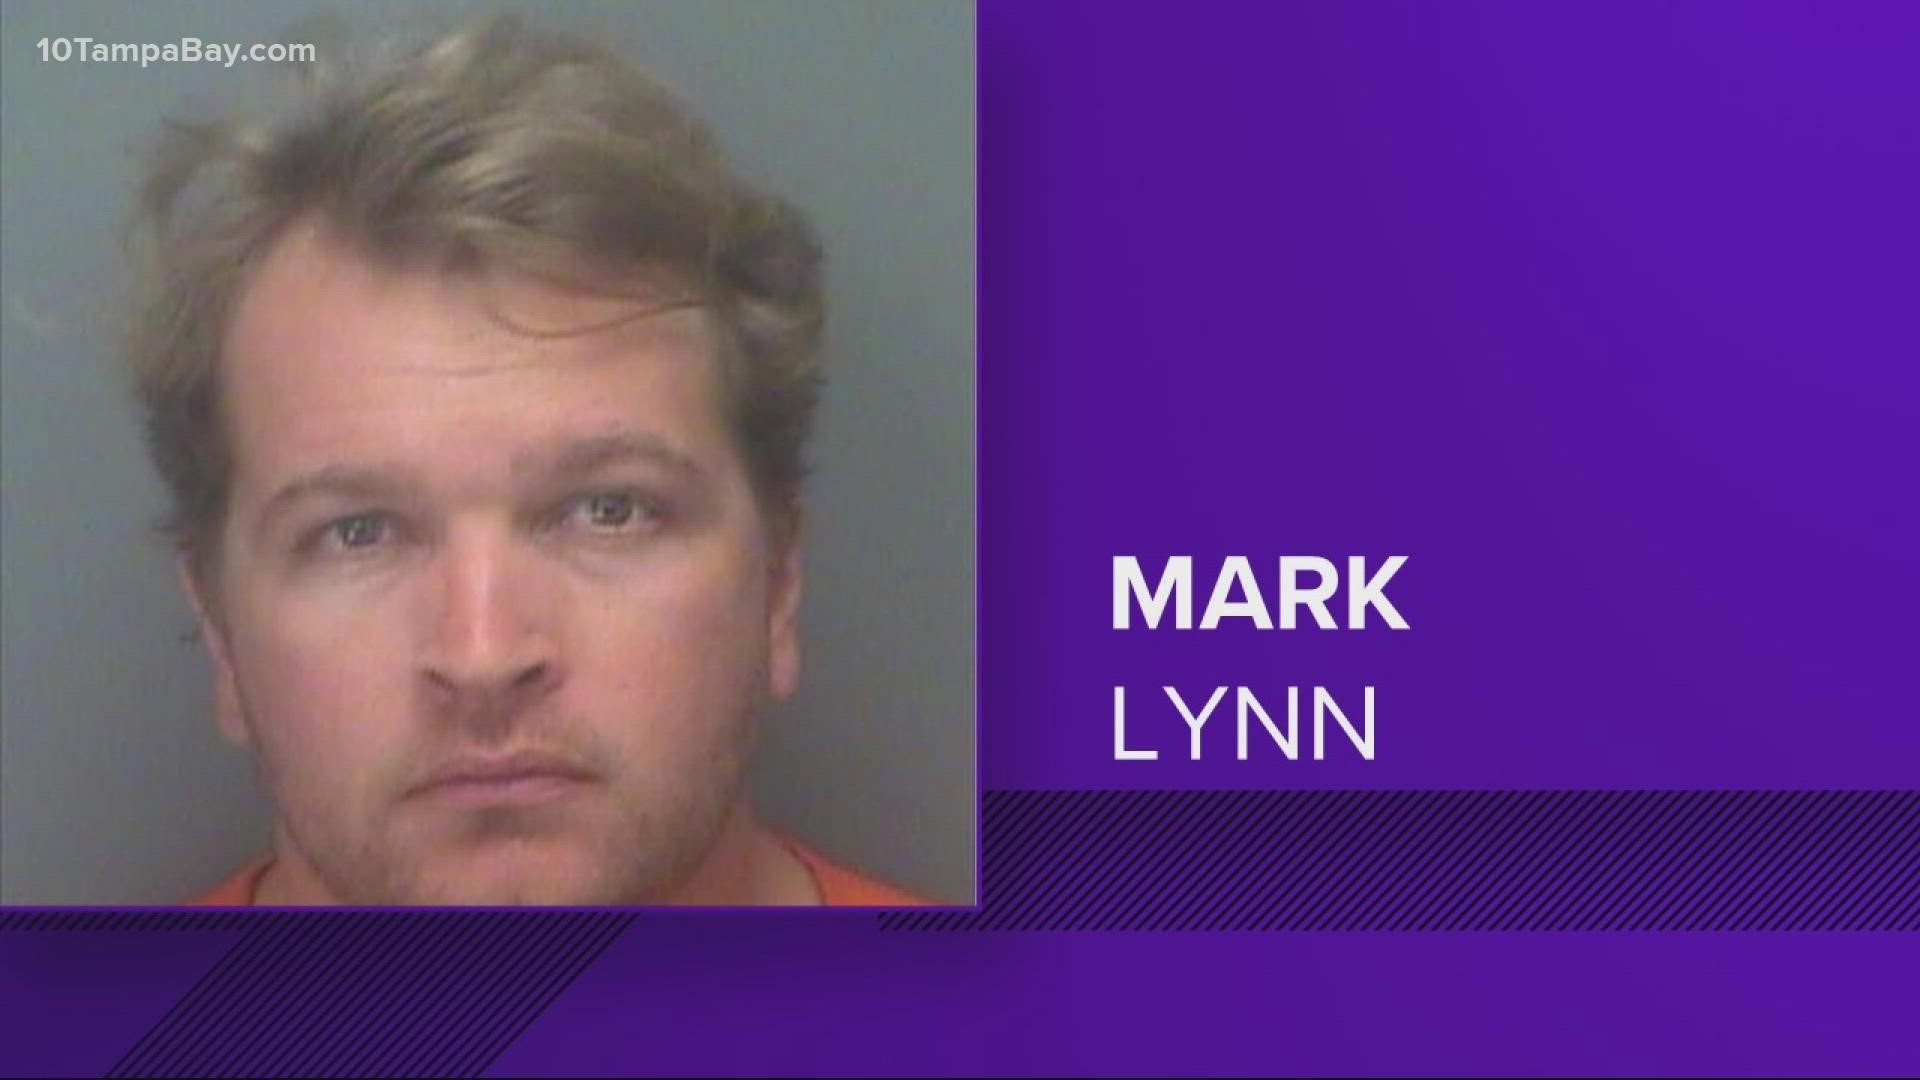 According to an affidavit, Mark Lynn was "highly intoxicated."